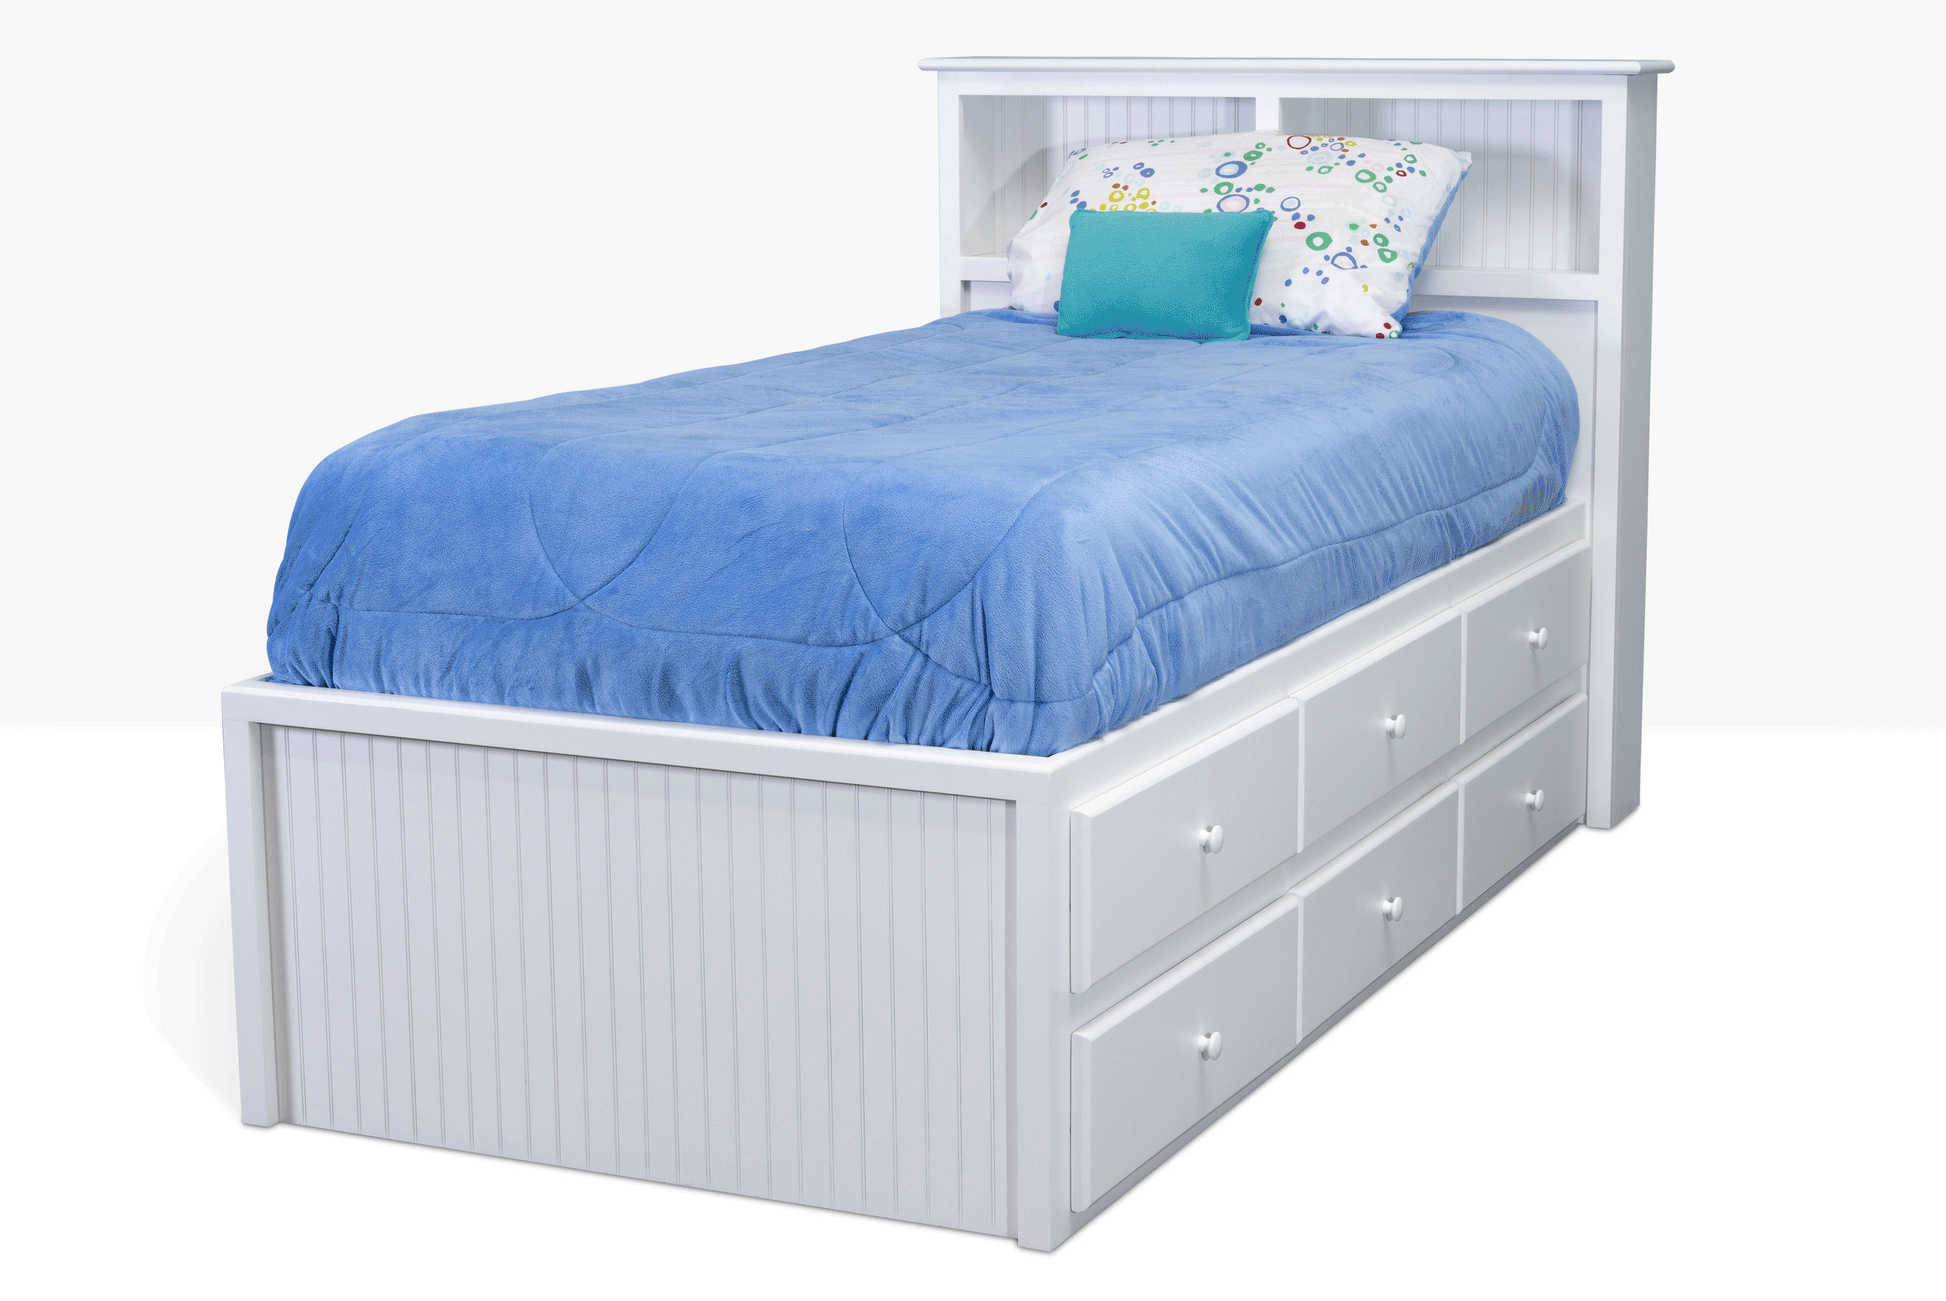 Acadia Cottage Storage Bed with 6 drawers on each side and a book case headboard for storage. Pictured in white with a two drawer nightstand with drawers extended to highlight storage areas.